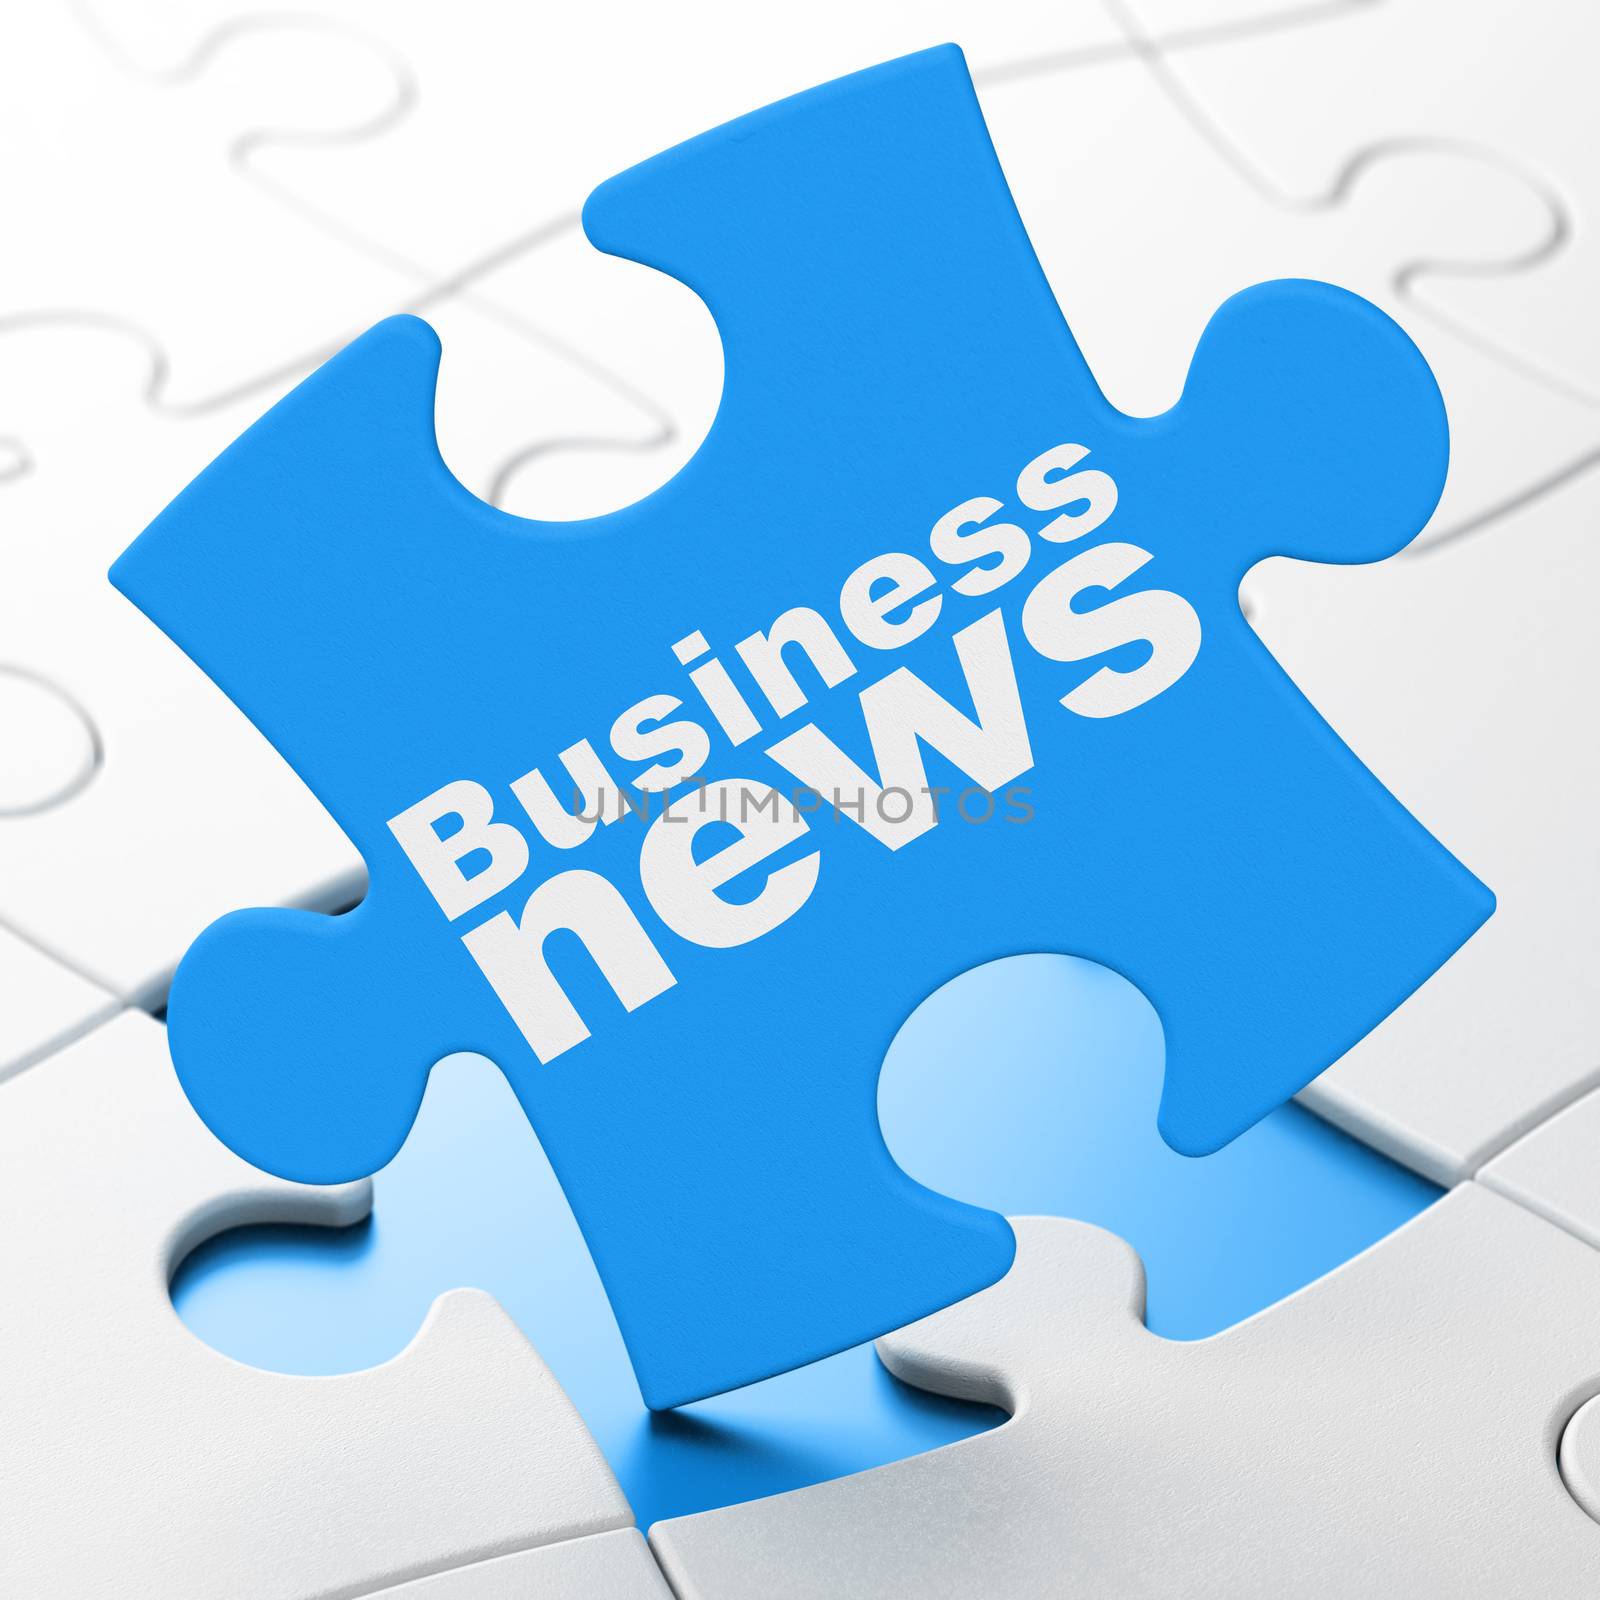 News concept: Business News on puzzle background by maxkabakov